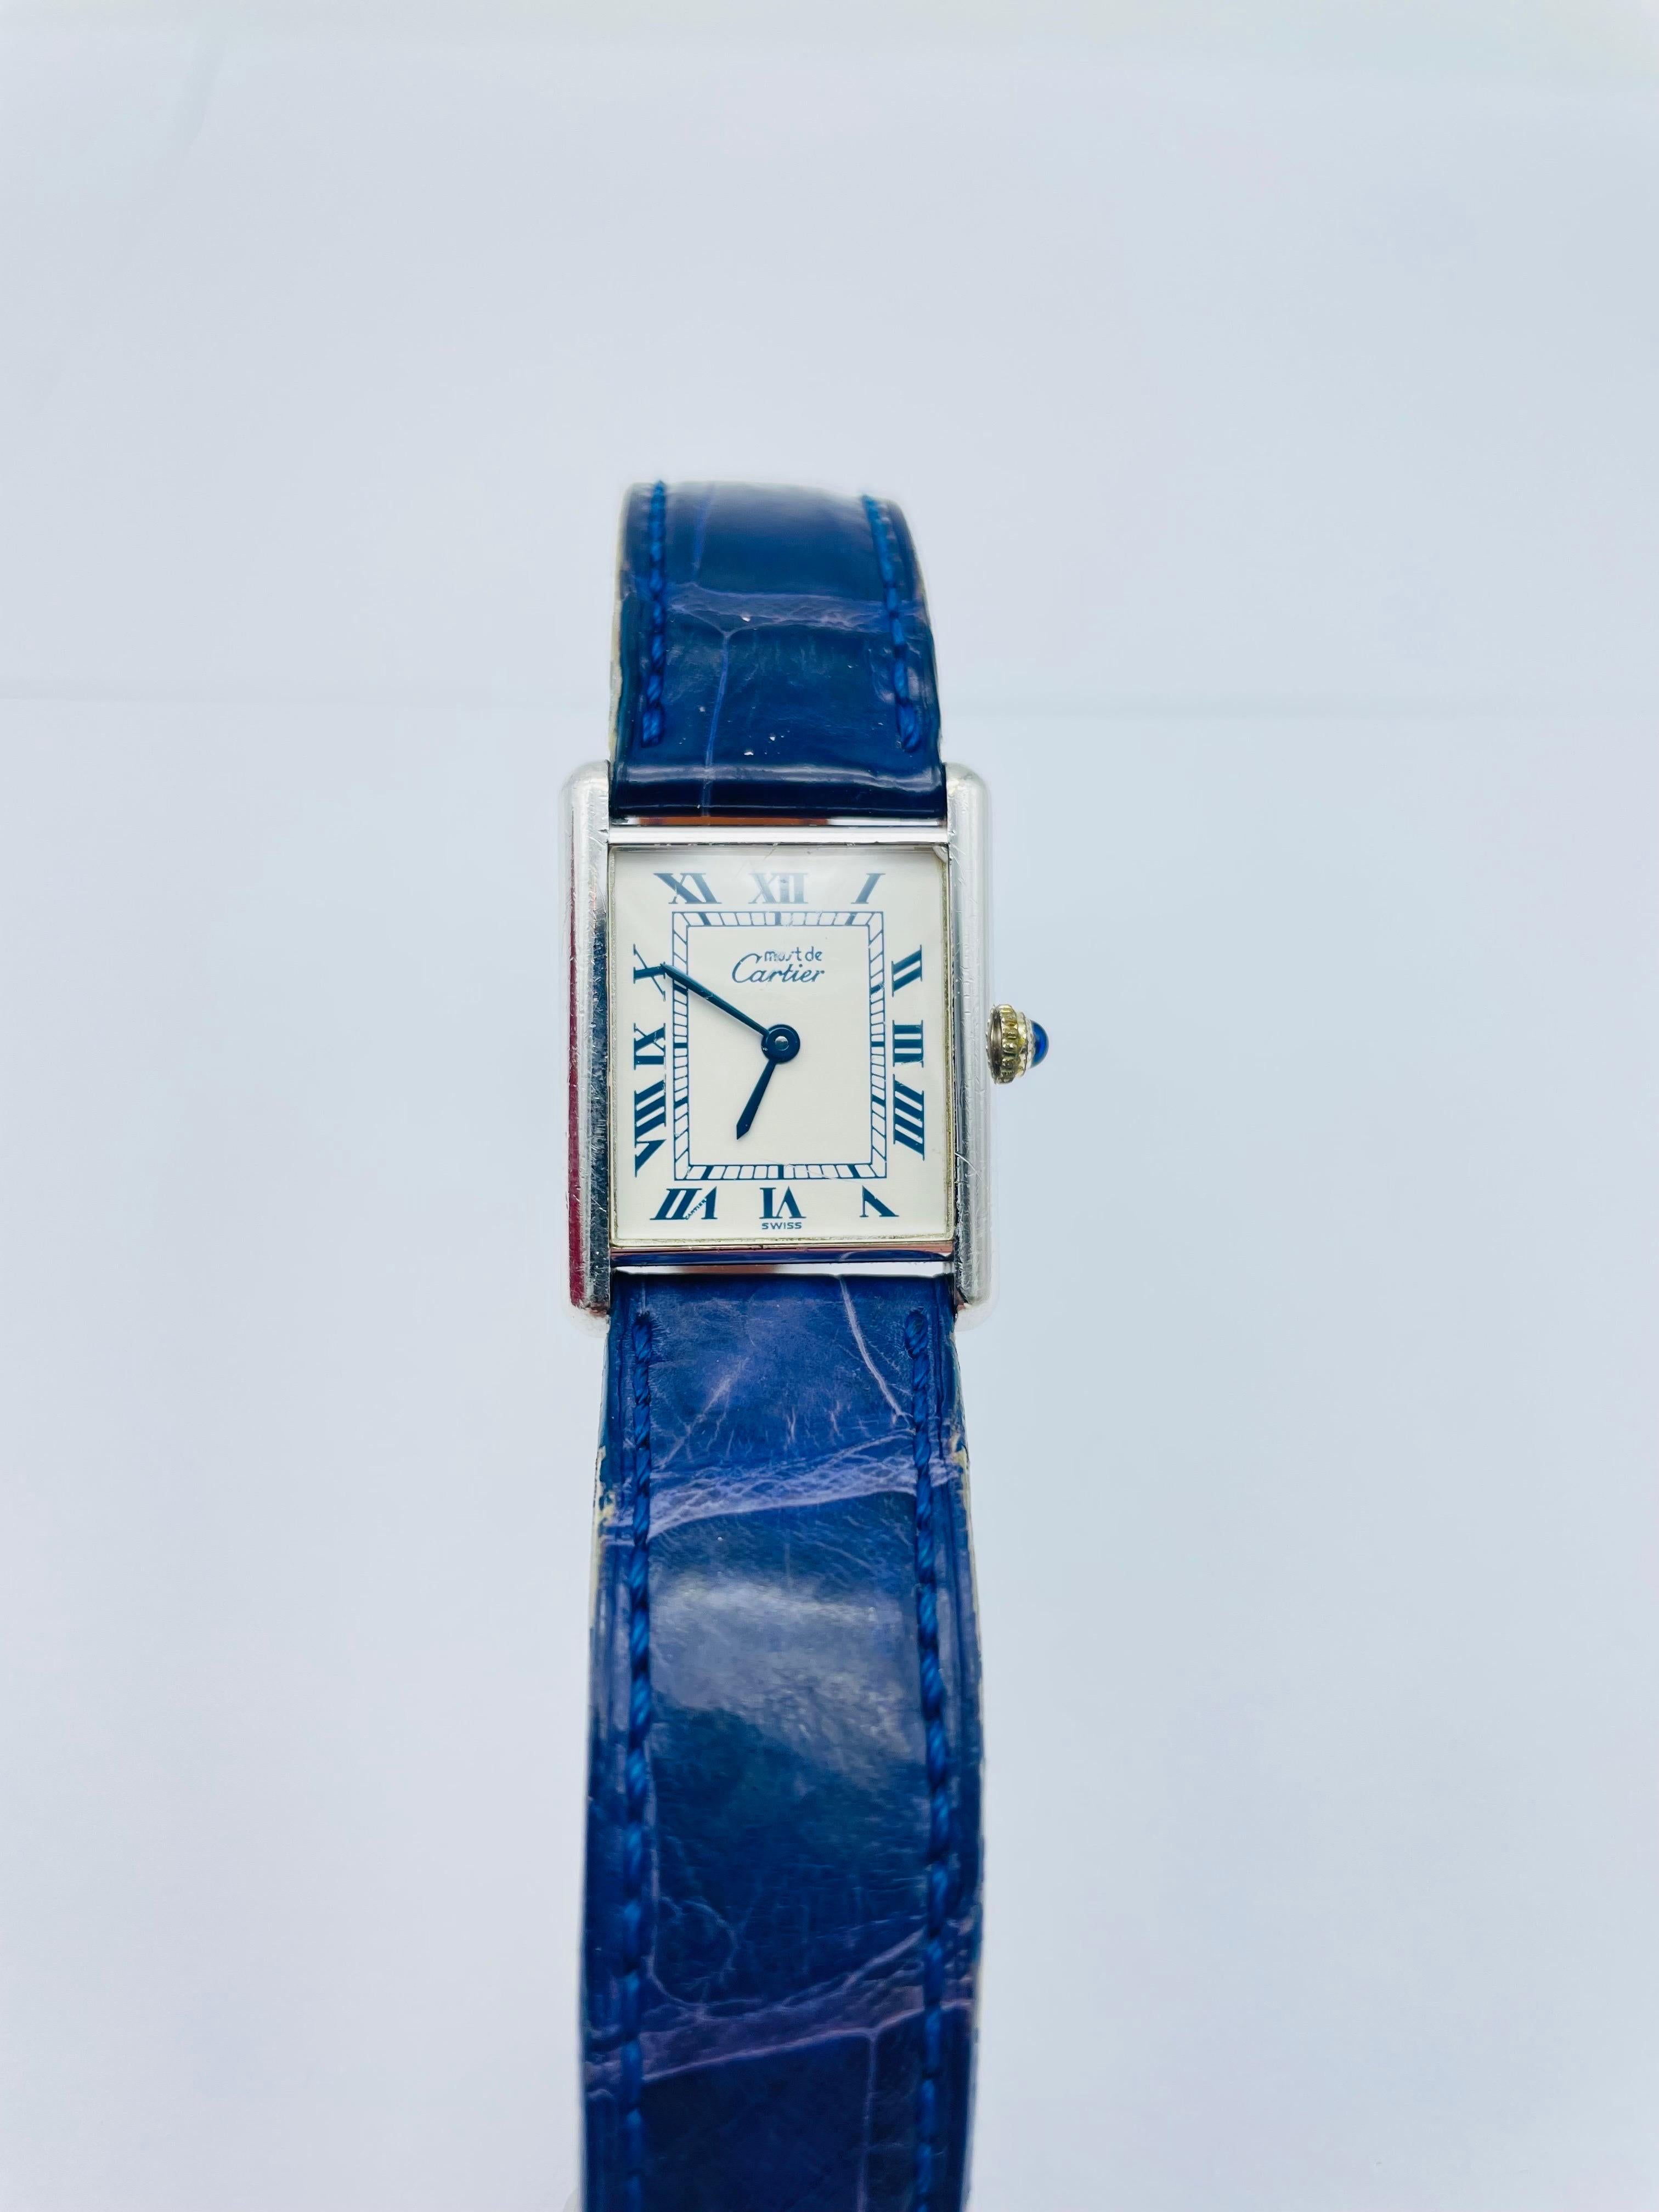 The Cartier Tank Must Watch in Silver Ref: 1616 is a true gem in the world of timepieces. From the iconic Cartier brand, this watch is a stunning example of classic design and superior craftsmanship. The Tank Must collection is renowned for its